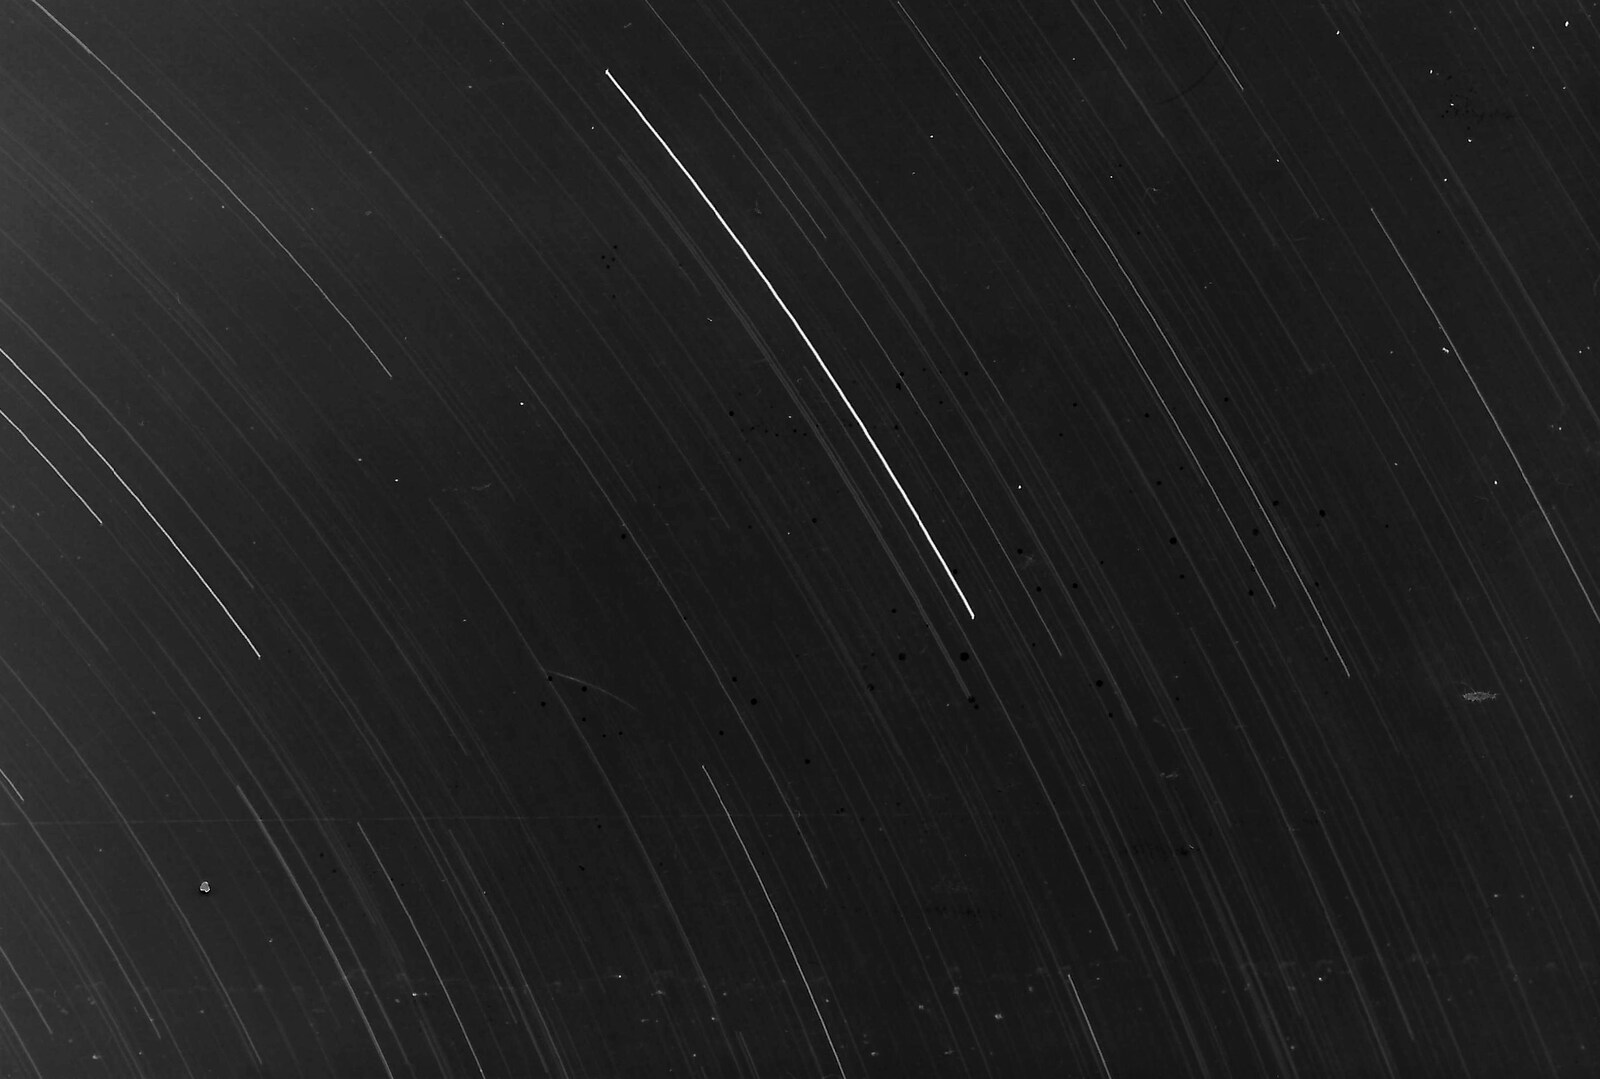 A star trail - not too exciting in black and white from Learning Black-and-White Photography, Brockenhurst College, Hampshire - 10th March 1985